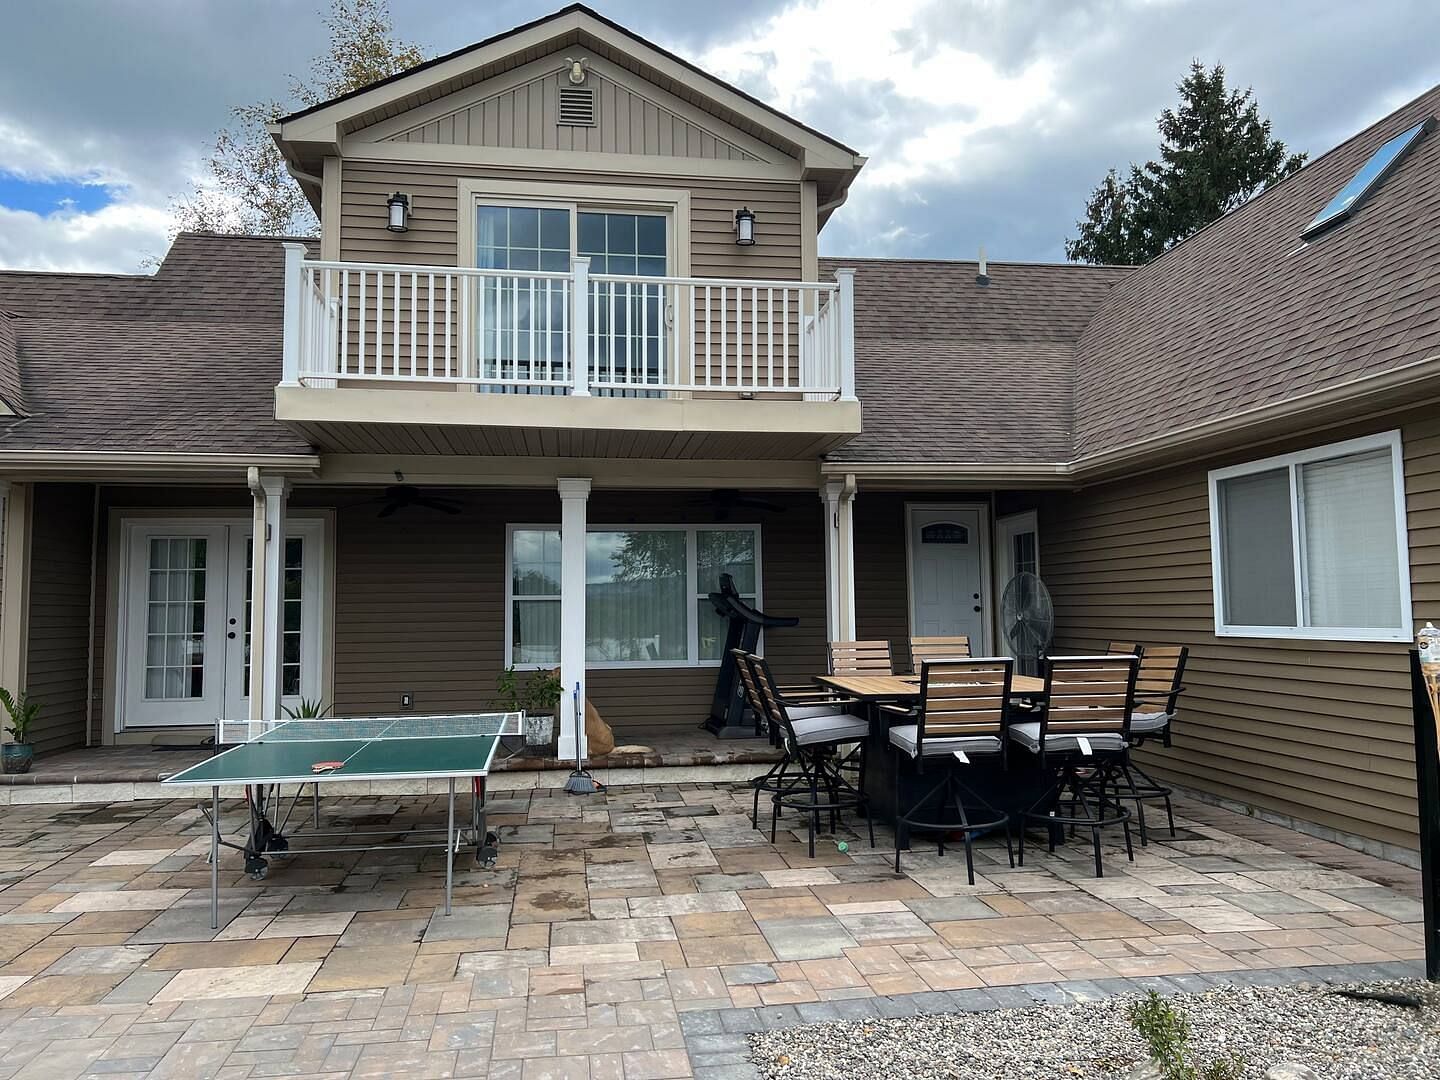 JWguest Villa at Wallkill, New York | Resort style house with pool - 5min from bethel | Jwbnb no brobnb 71